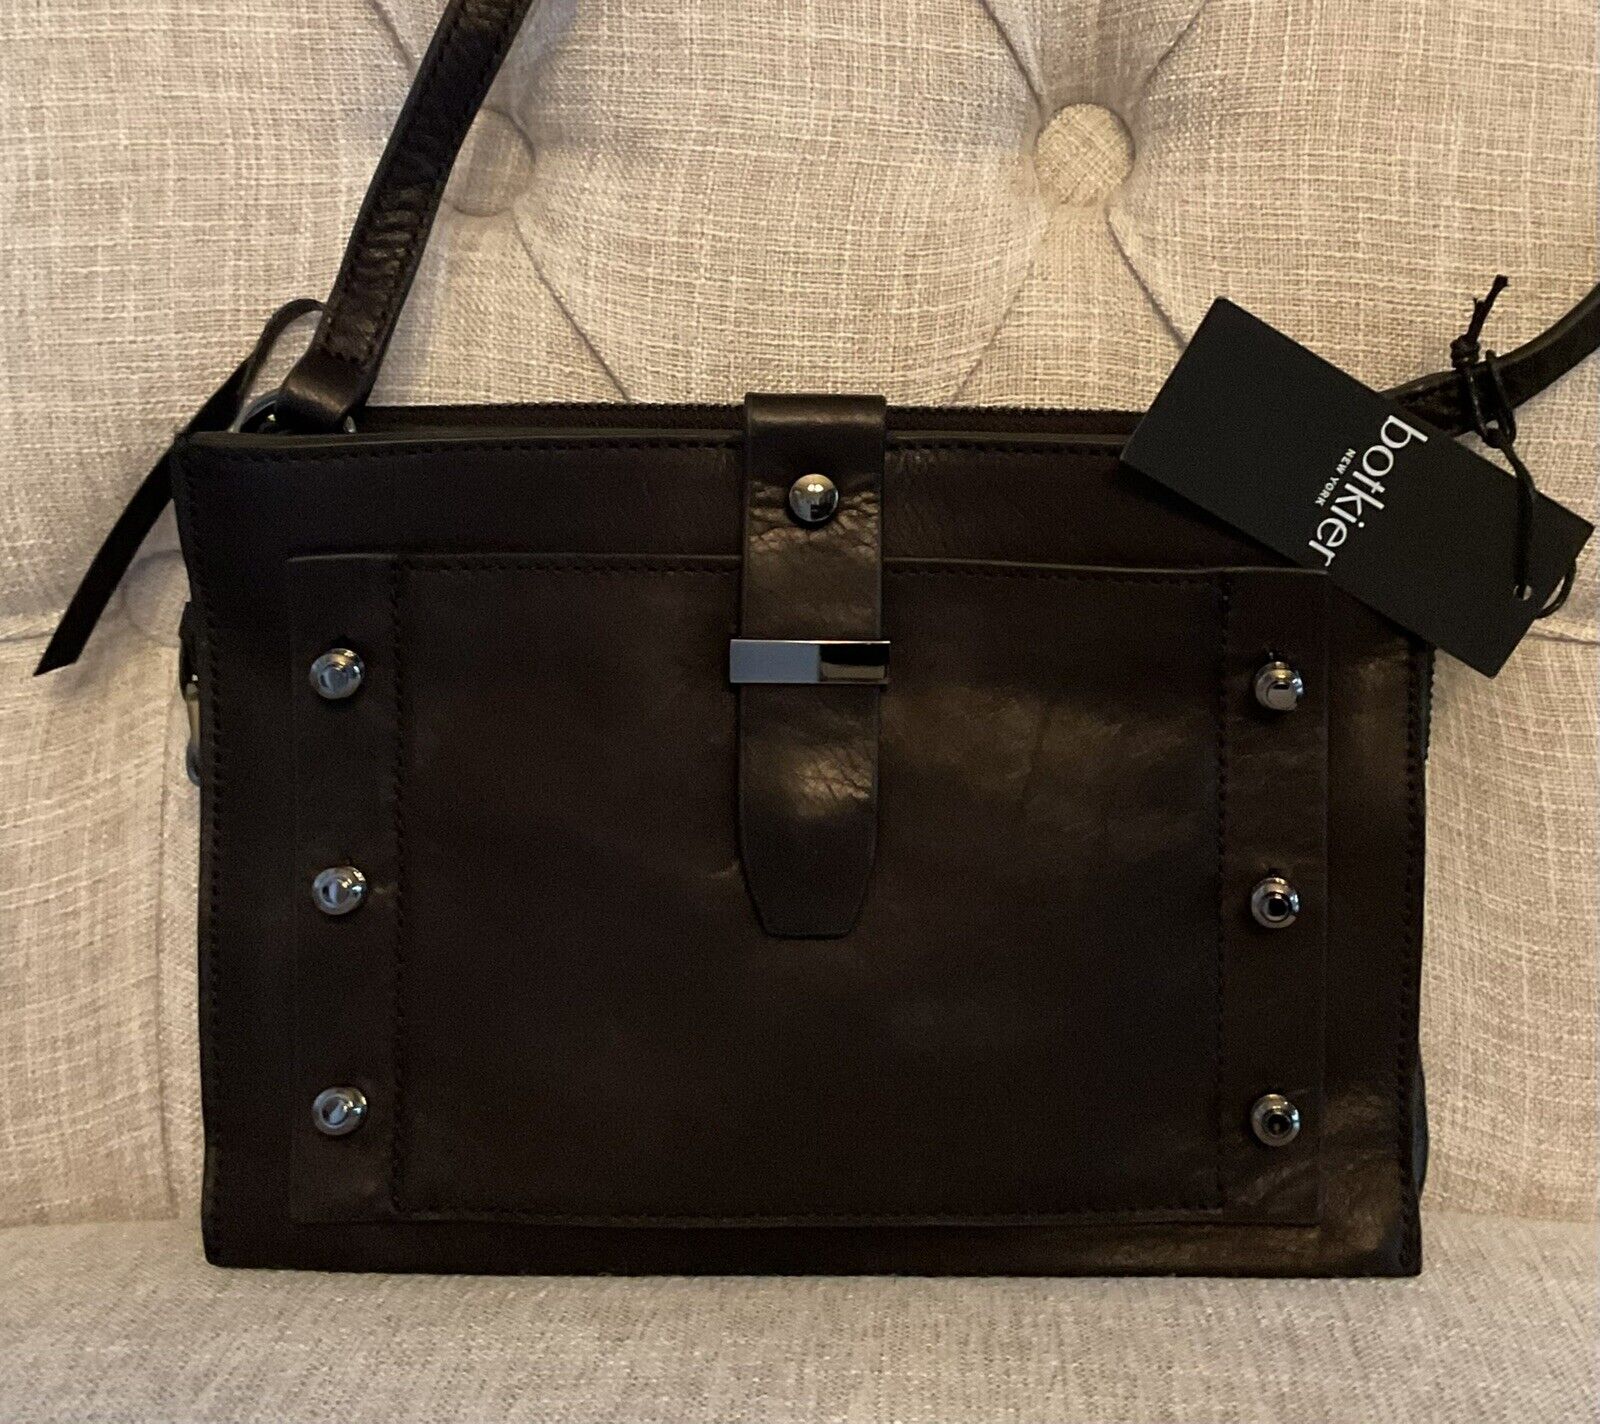 BOTKIER NY Black Leather Warren City Crossbody (NWT, Includes Dust-bag) 50% OFF